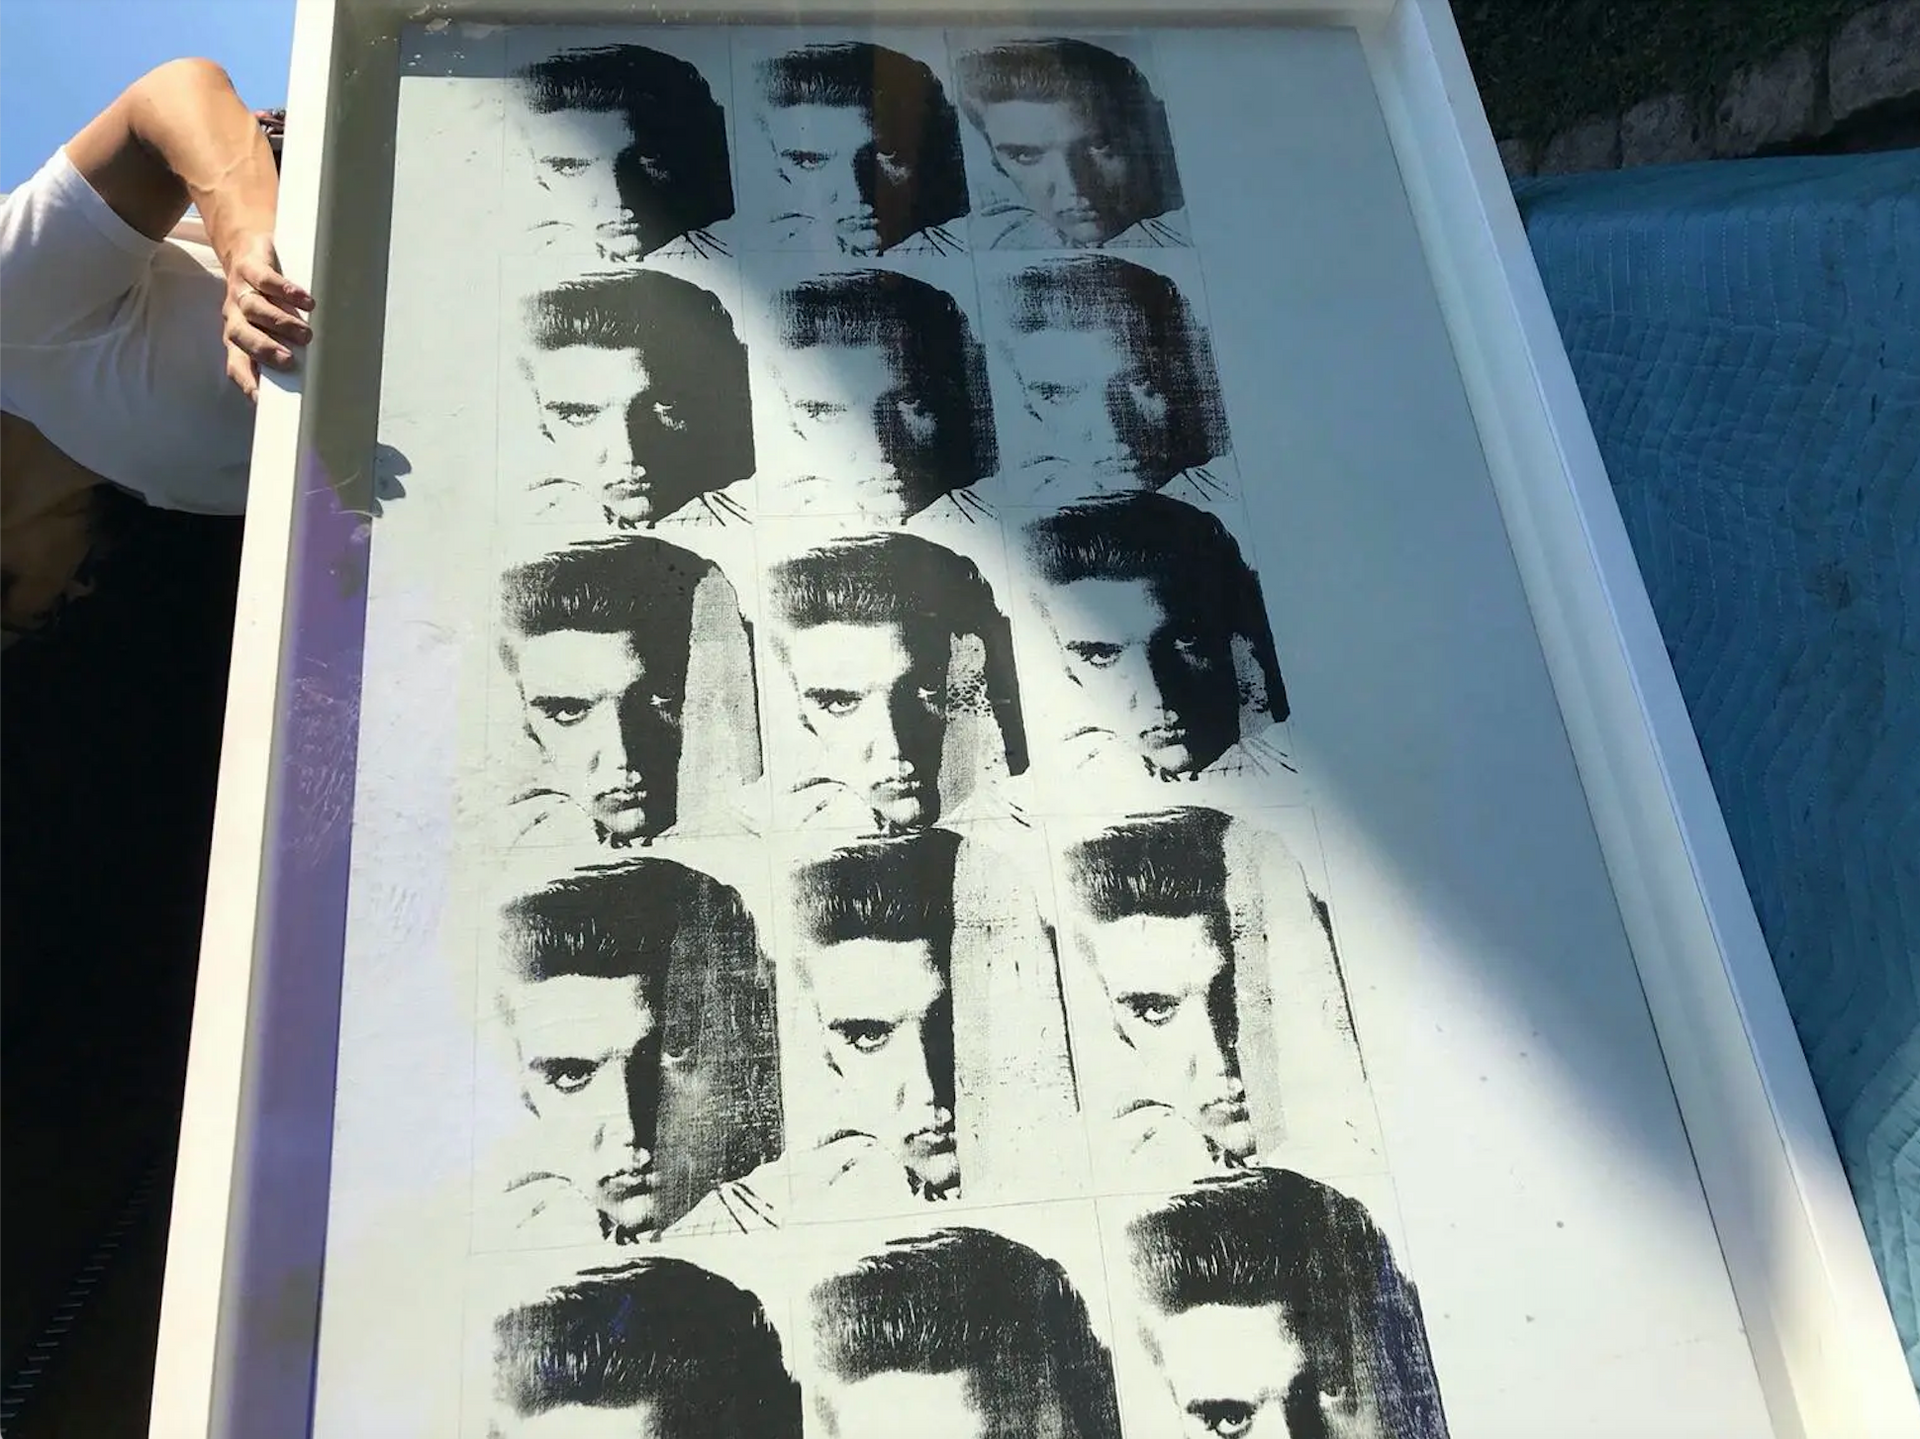 Andy Warhol's Elvis (21 Times) is one of five artworks that a lawsuit claims were badly damaged during a fire at Ron Perelman's estate in the Hamptons, New York. Courtesy of the New York State Supreme Court filing